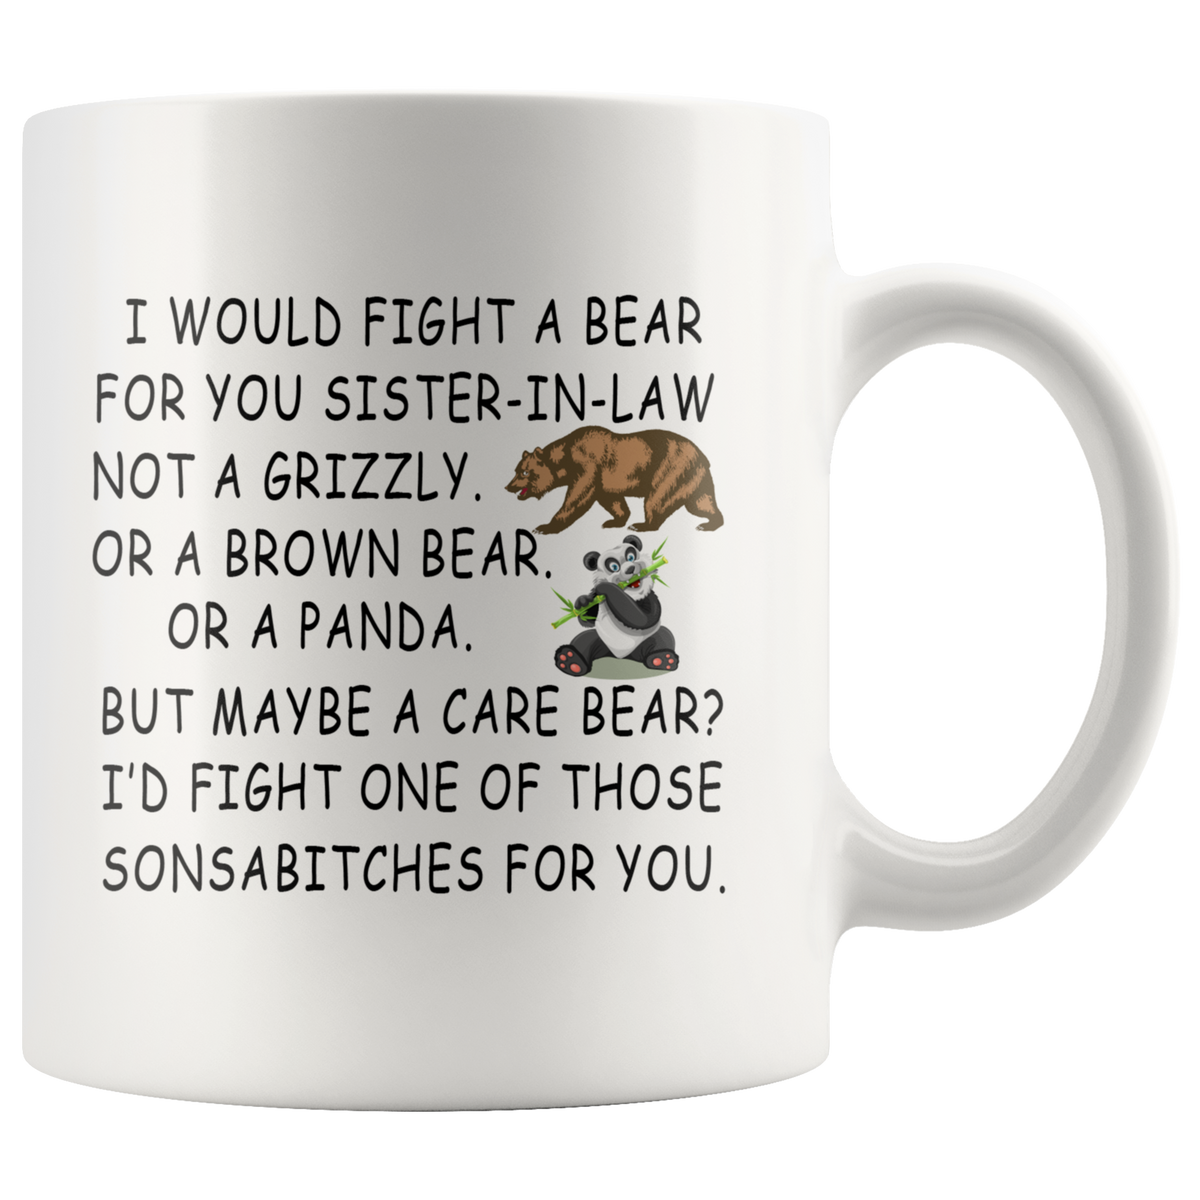 Funny Gift For Sister In Law - I Would Fight A Care Bear For You Ceramic Coffee Mug 11oz